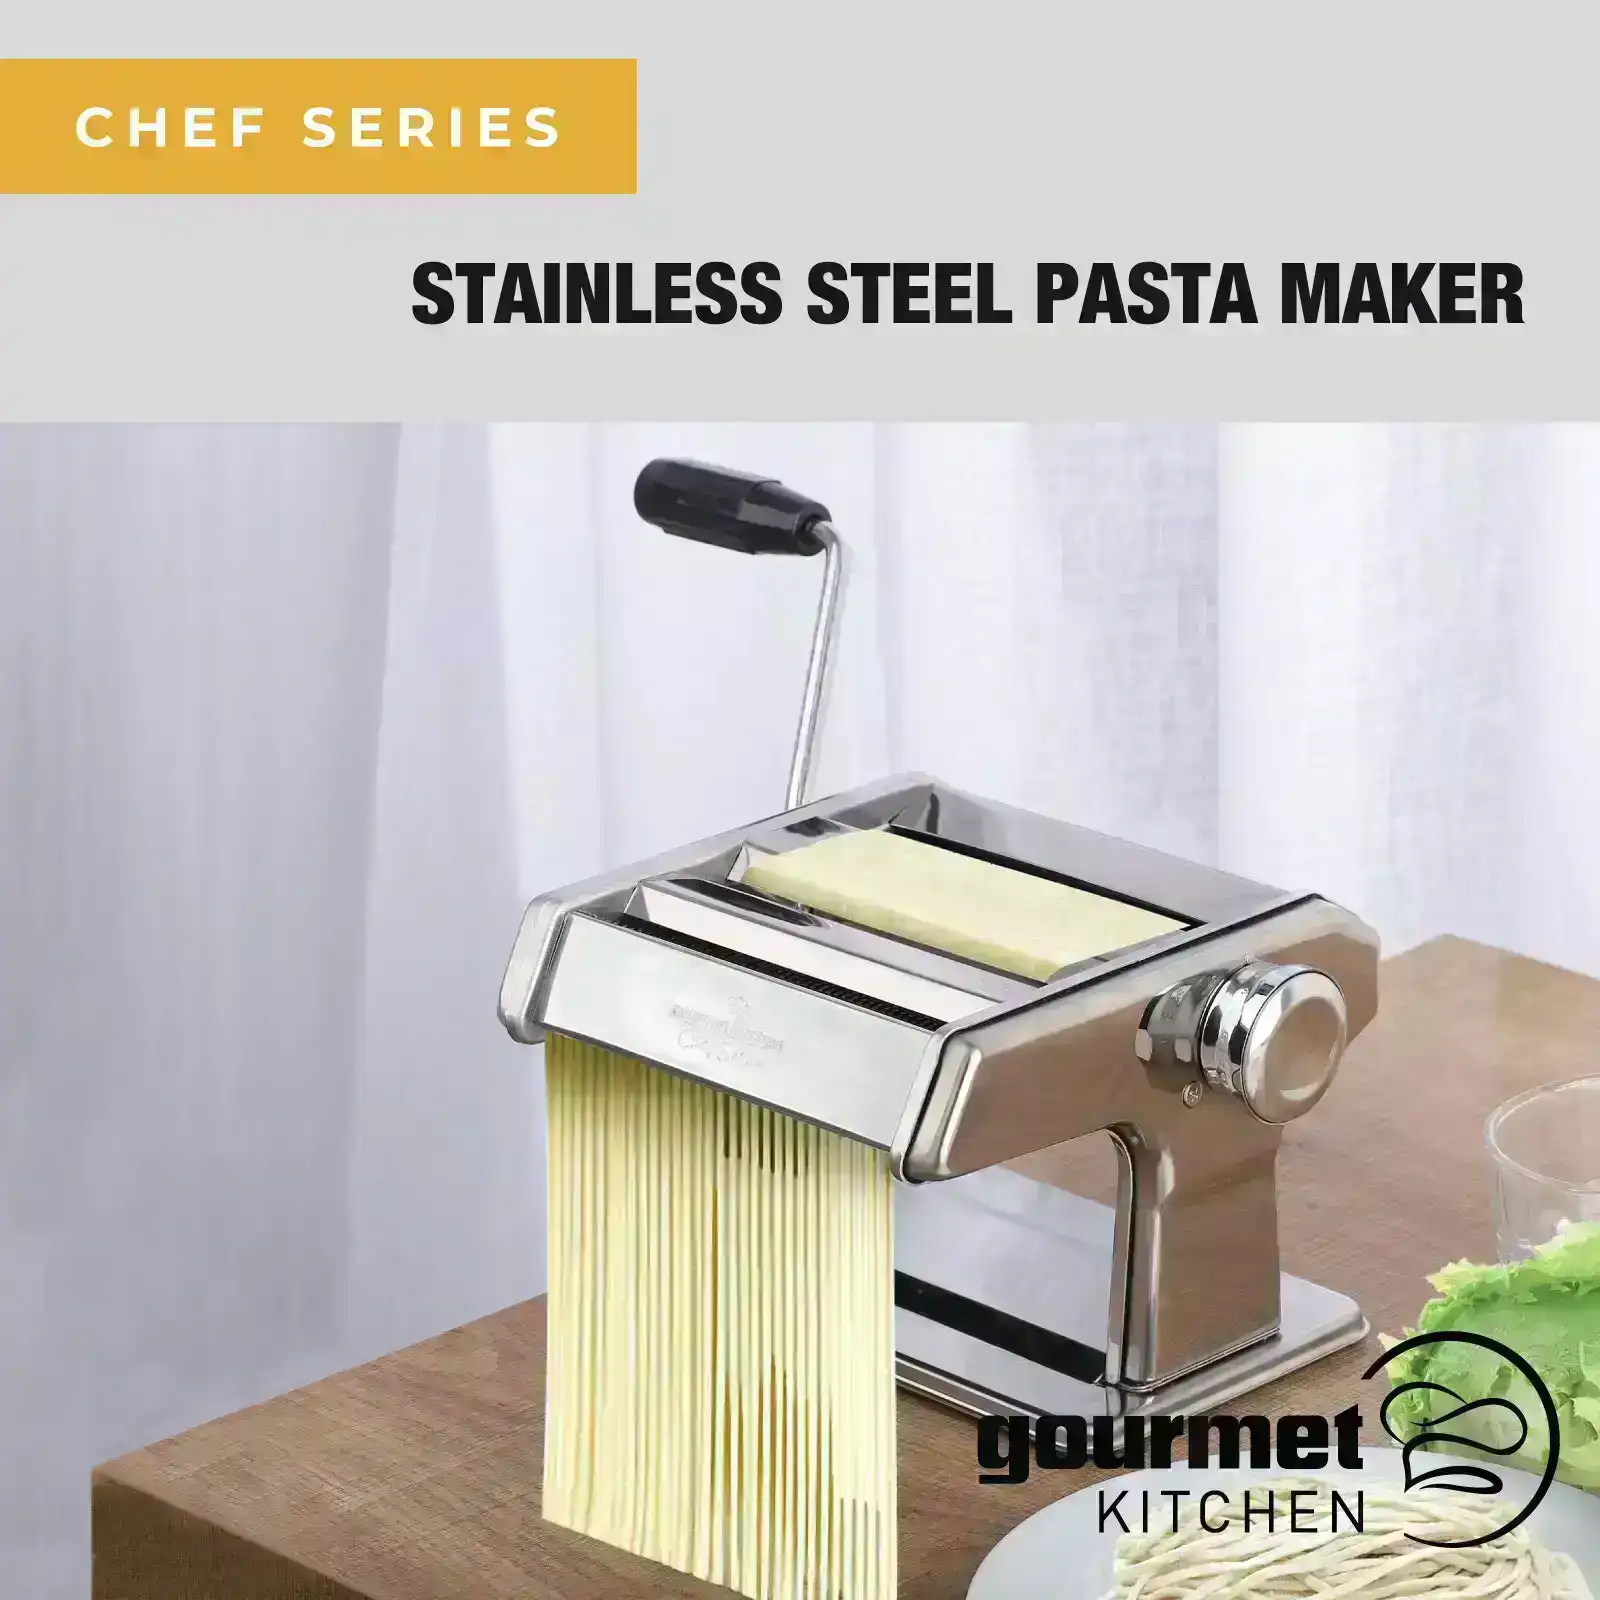 Gourmet Kitchen Chef Series Stainless Steel Pasta Maker - Italian Fettuccine and Spaghetti - Silver